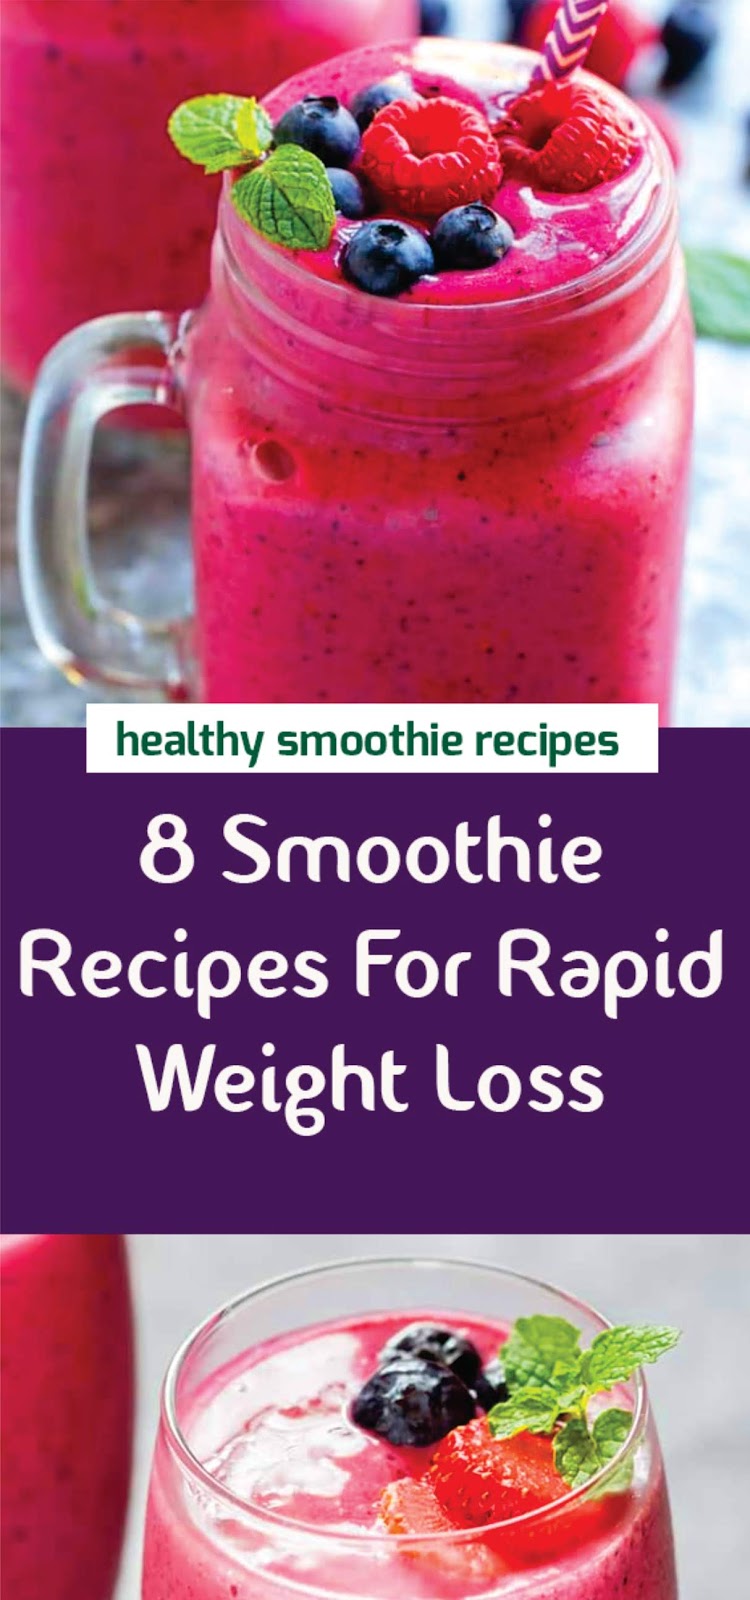 8 Smoothie Recipes For Rapid Weight Loss | drink recipes, cocktail recipes, cocktail, martini recipe, margarita recipe, mixed drinks, punch recipes, vodka cocktails, mixed drink recipes, cocktail drinks, cocktail mixer, cocktail ingredients, best mixed drinks, fruity mixed drinks, rum cocktails, good mixed drinks, easy cocktail recipes, alcoholic drink recipes, popular mixed drinks, tequila cocktails, beverage recipes, easy mixed drinks, best cocktails, cocktail drink recipes, vodka martini recipe, martini, summer cocktails, simple cocktail recipes, vodka mixed drinks, champagne cocktail. #drinkrecipe #healthydrink #vanillabean #icedcoffee